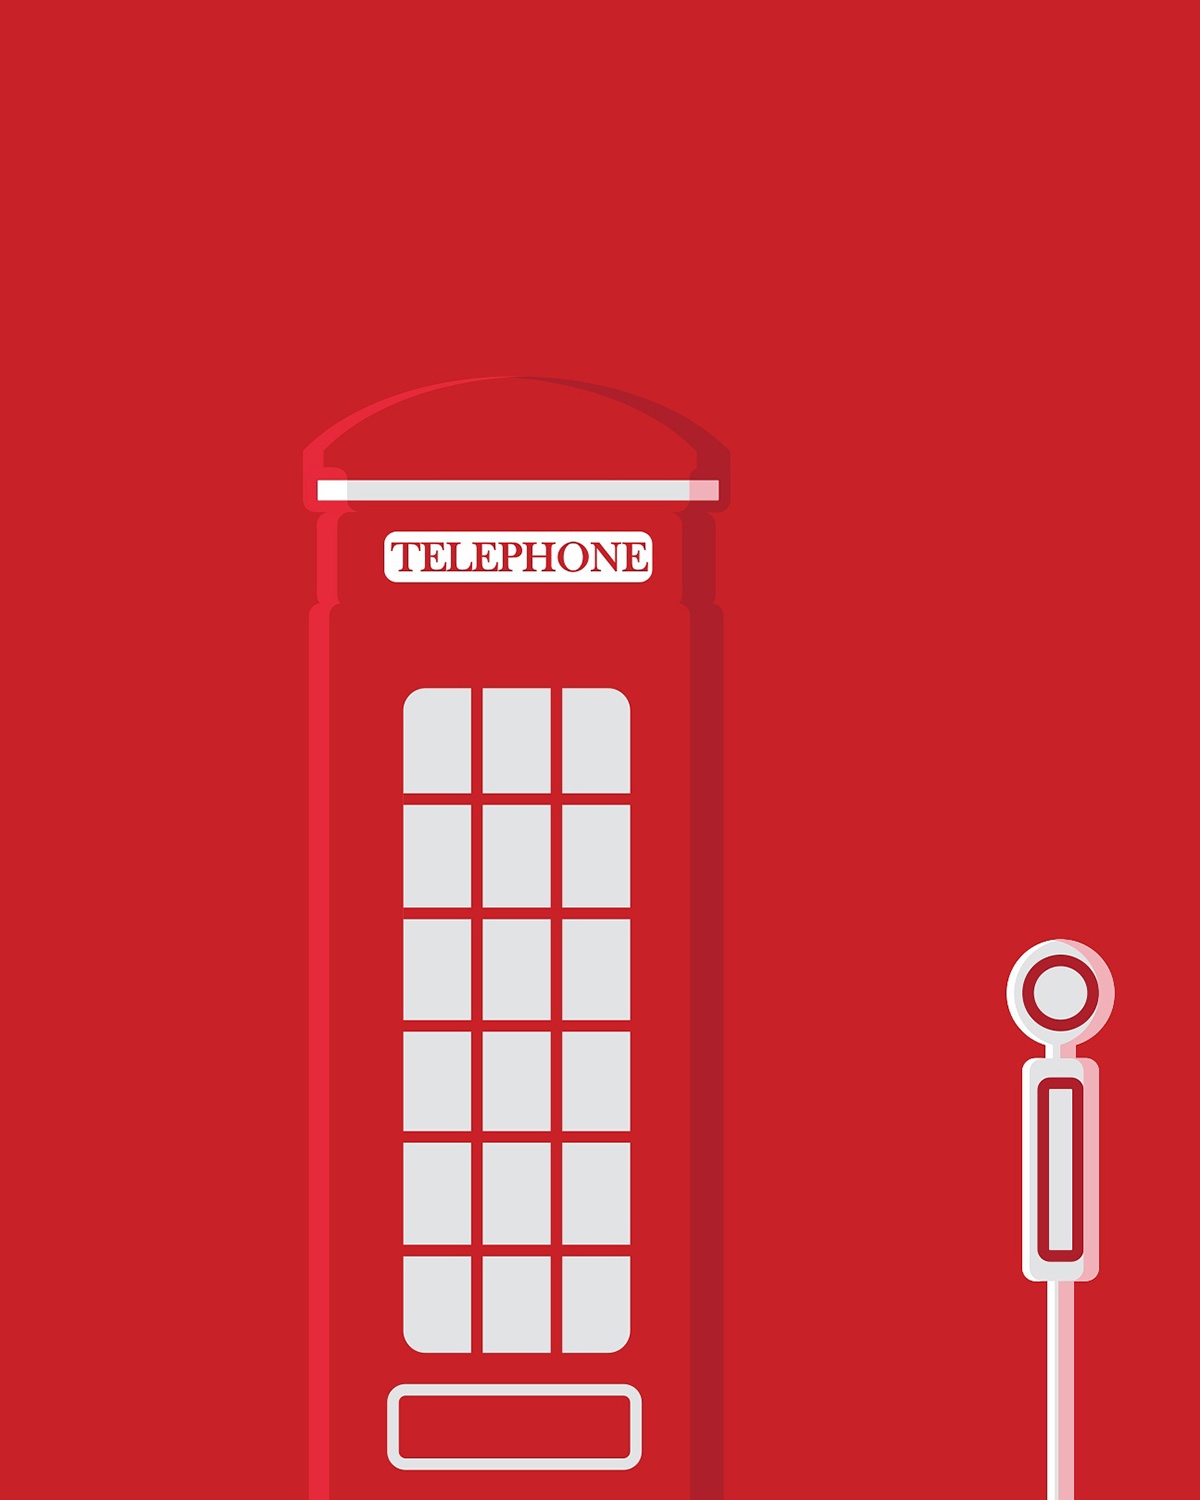 ILLUSTRATION  red five colors telephone box